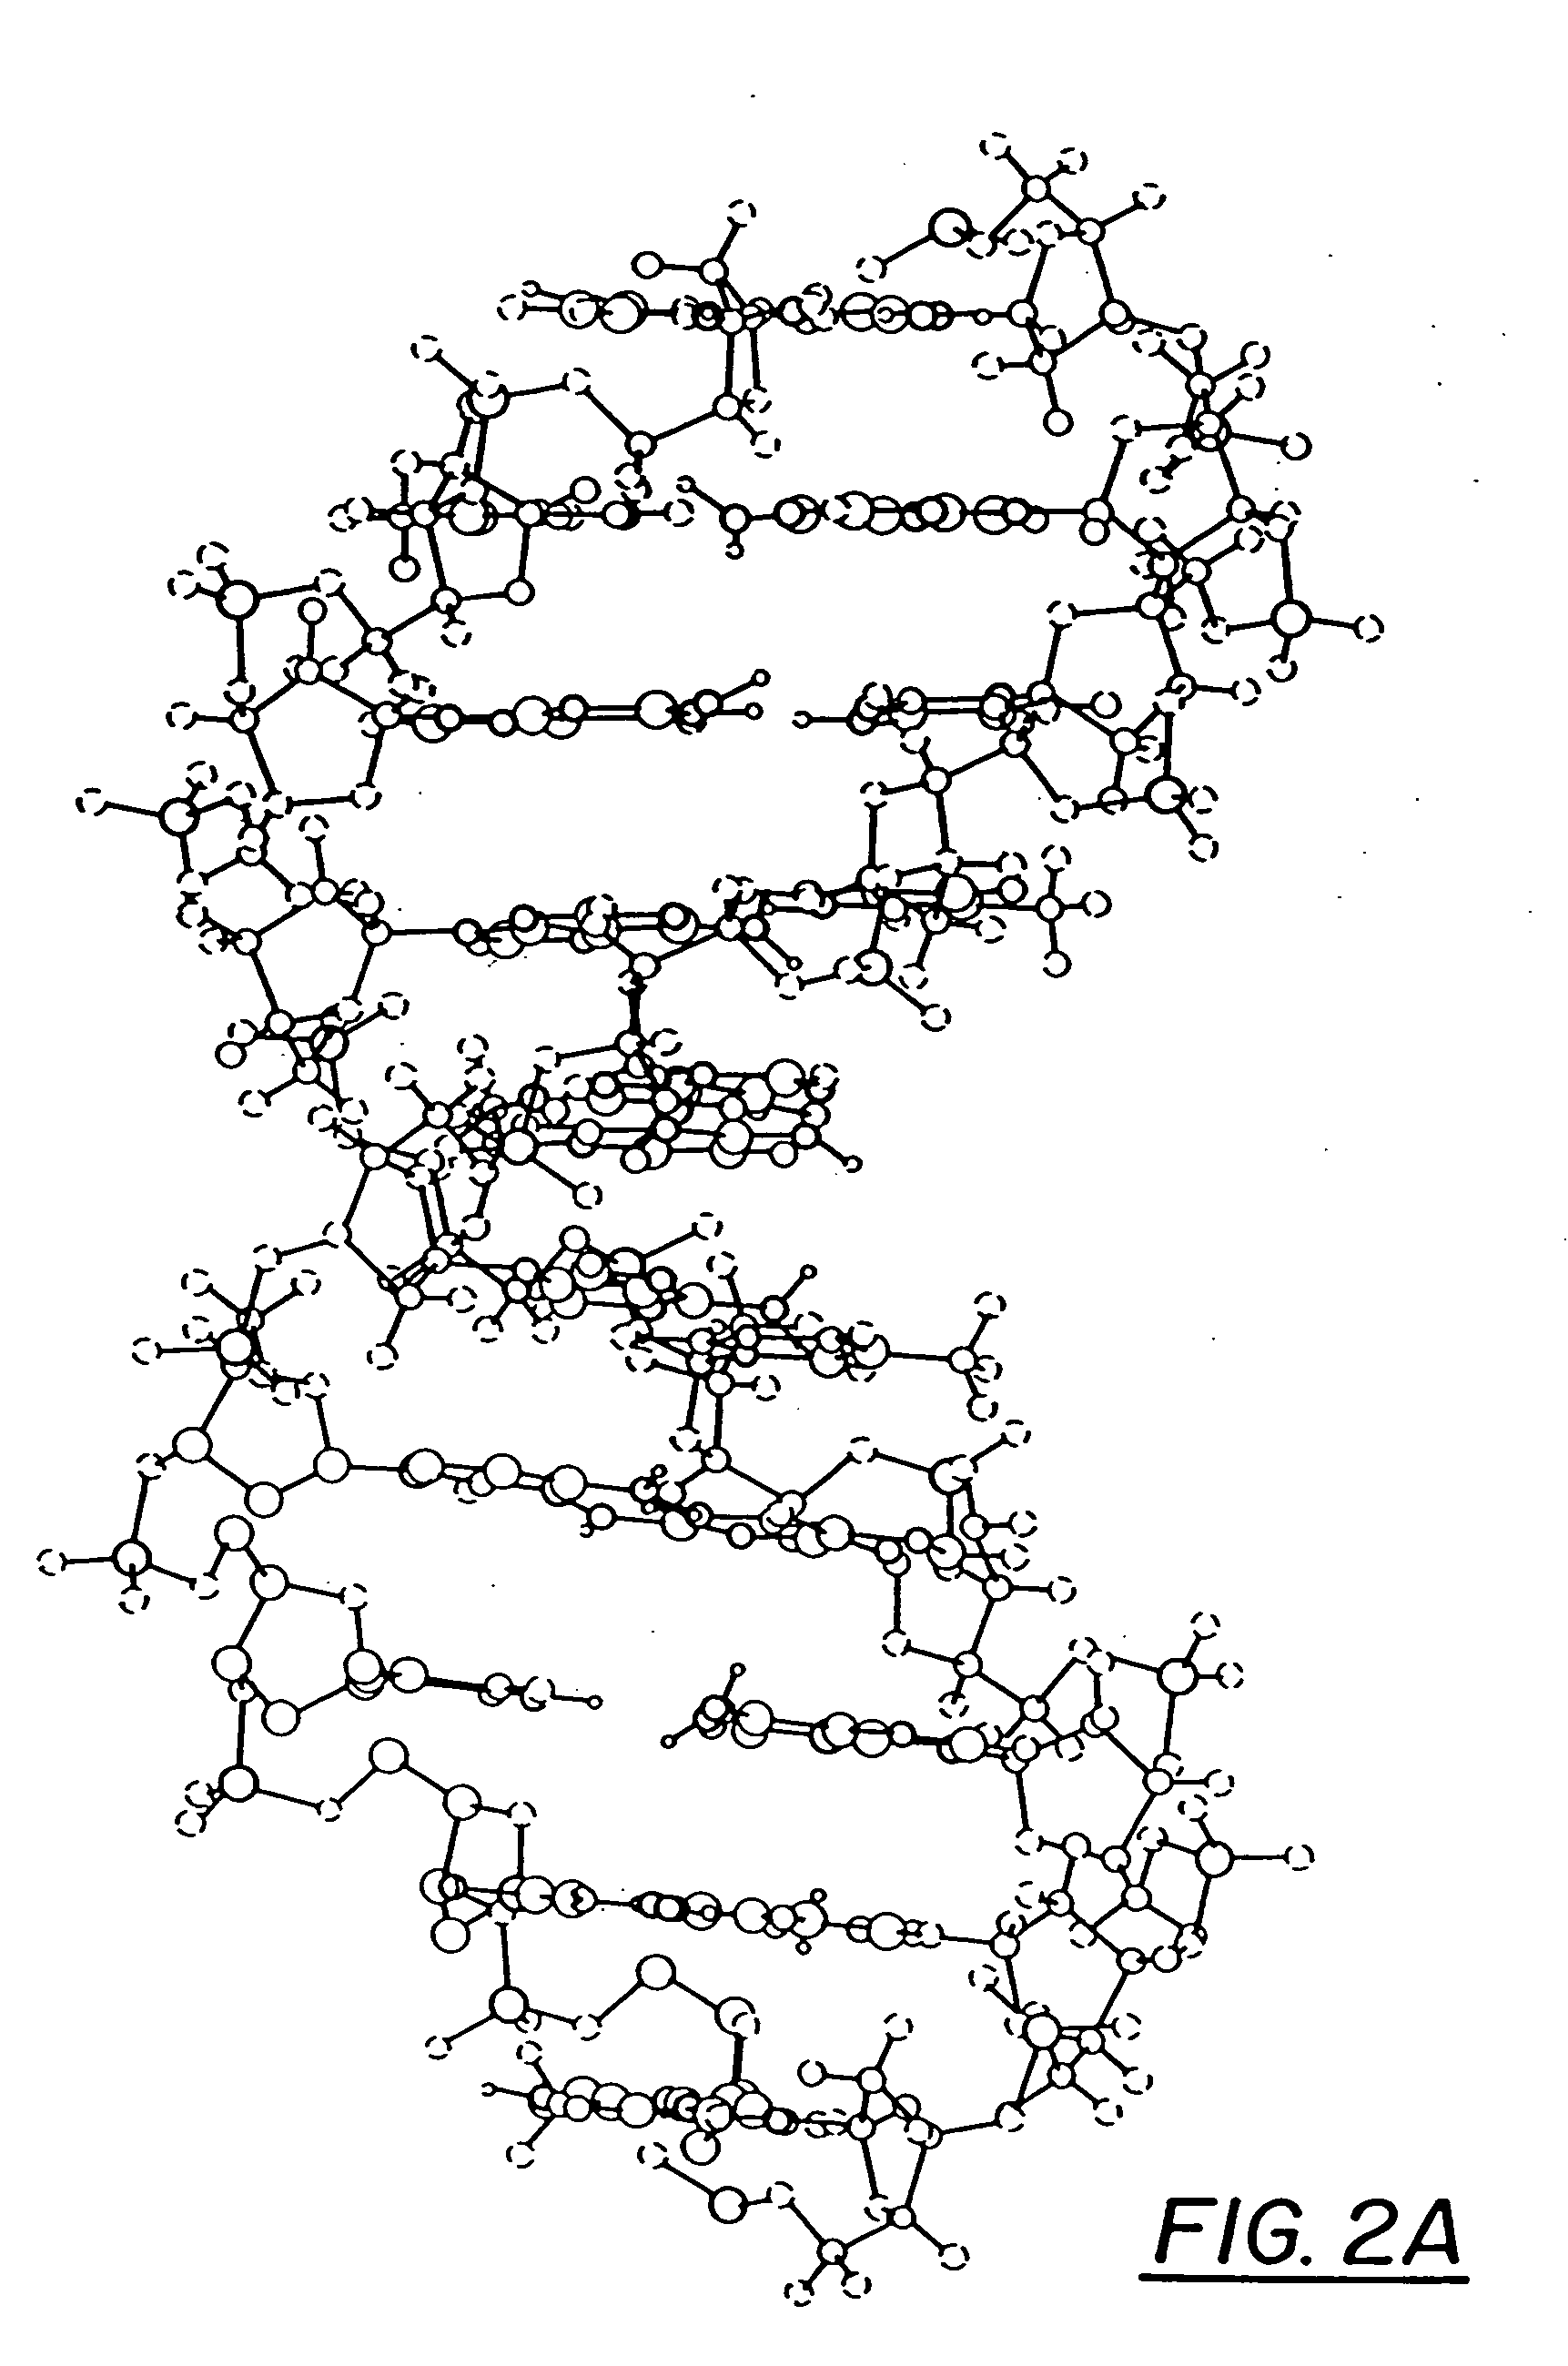 Ring-expanded nucleosides and nucleotides